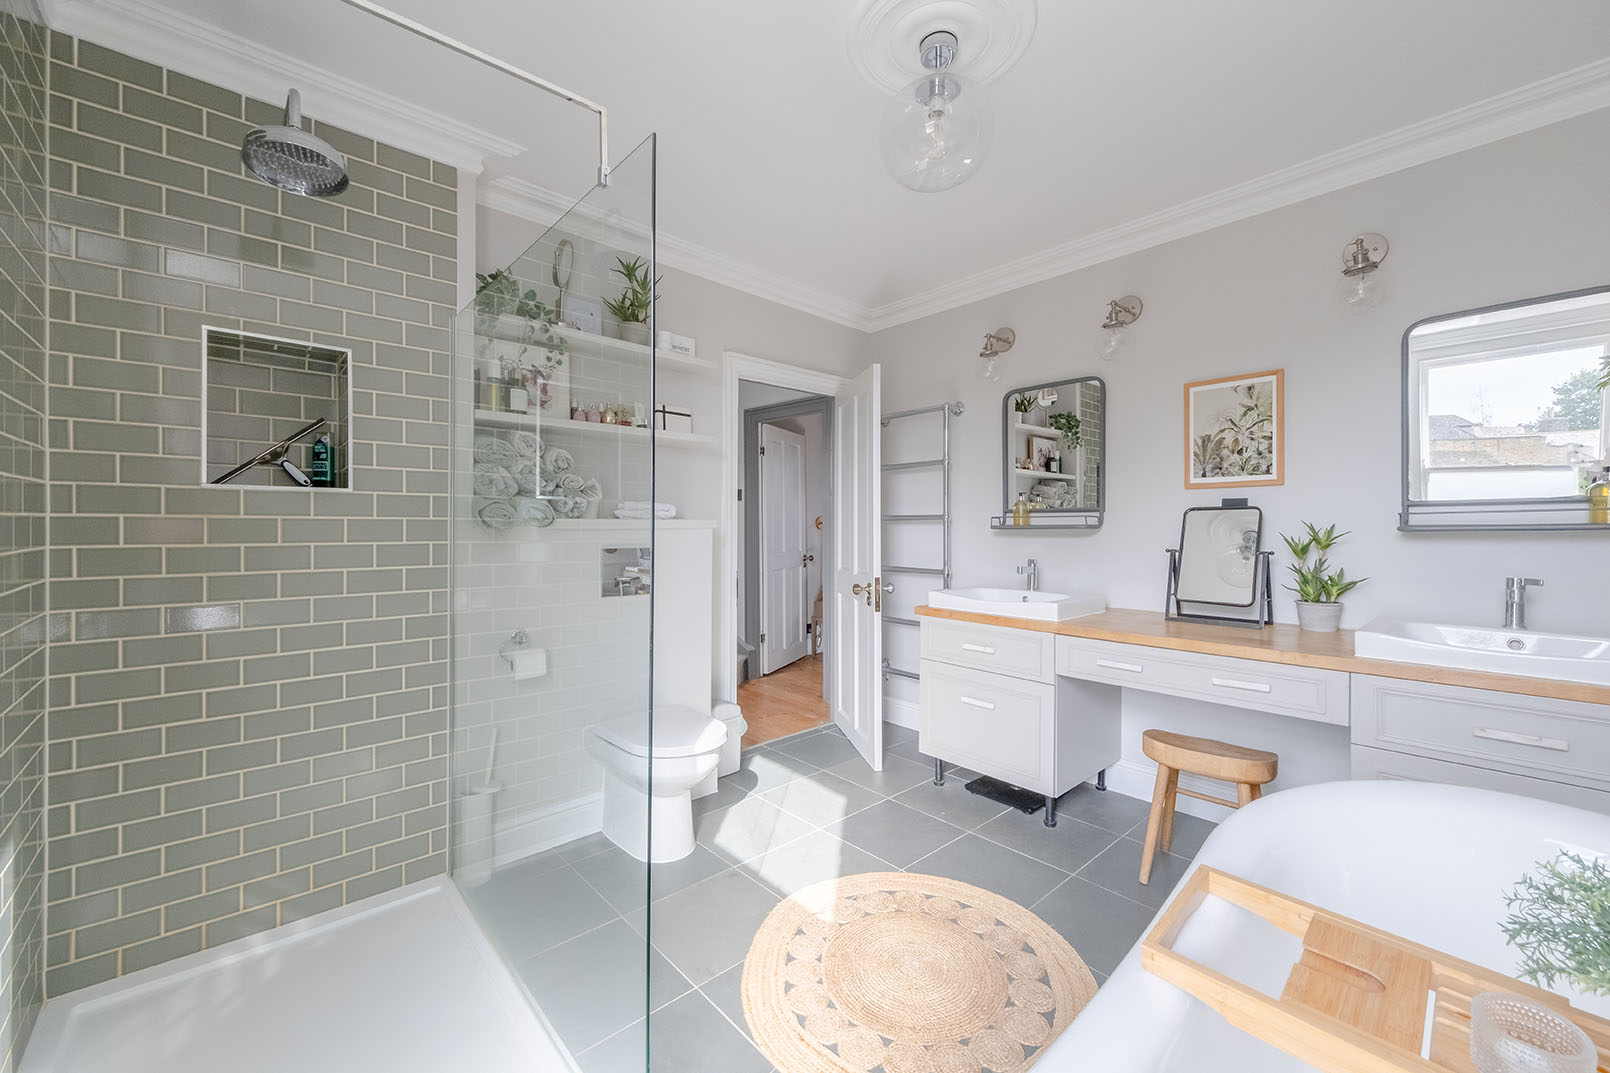 a bathroom photo from a property photography series, natural colours, bright and modern design space, light grey walls, double sink counter with light green details, looking towards the entrance of the space, showing partially the shower screen